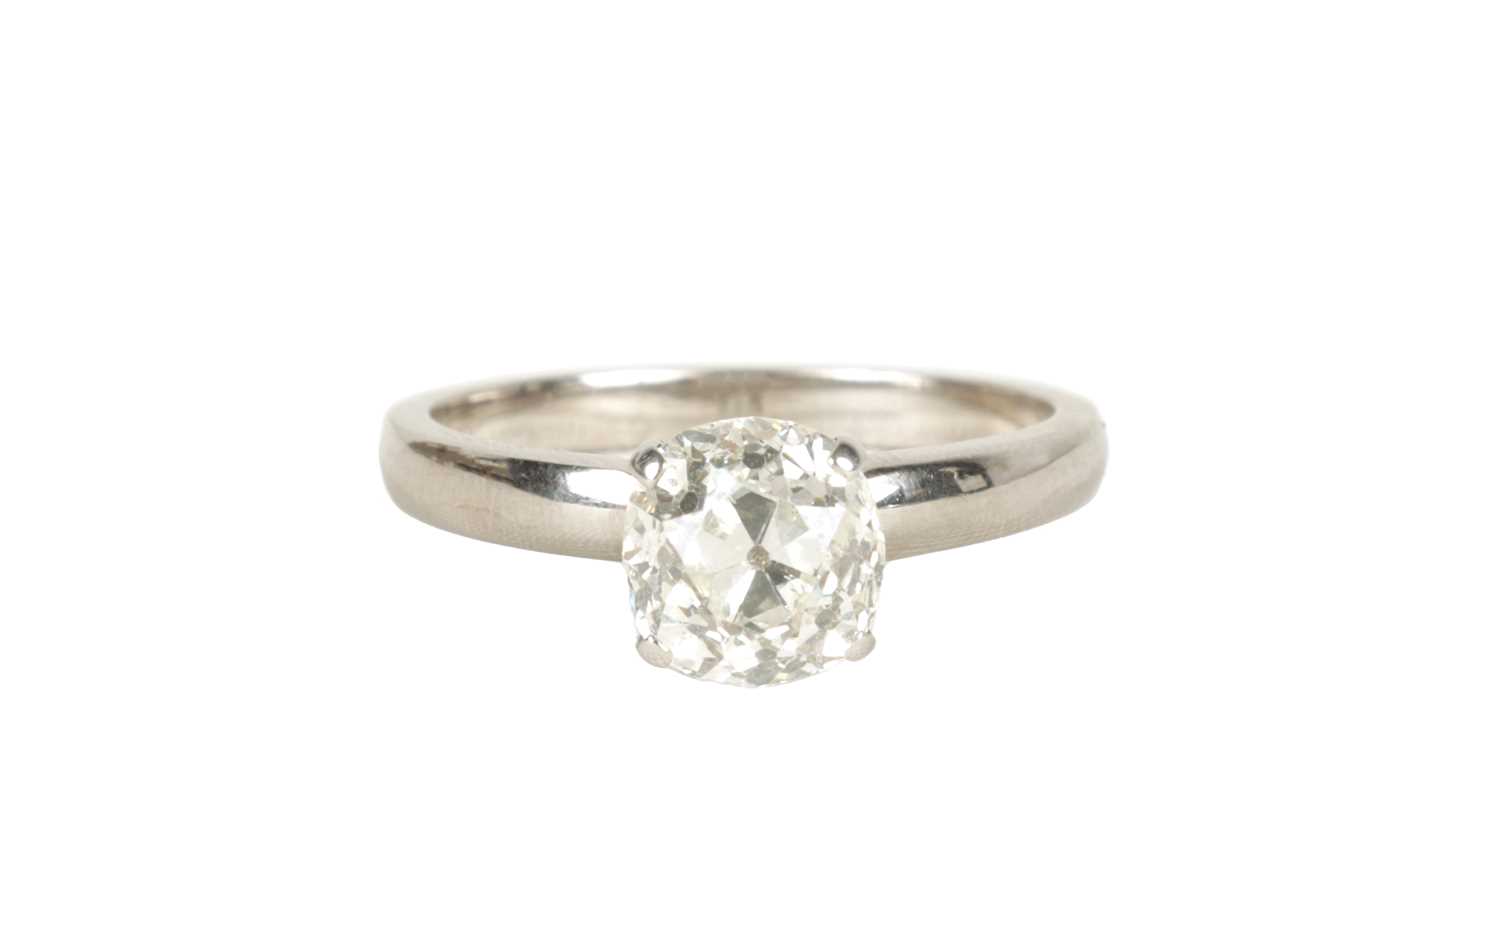 Lot 226 - A LADIES 18CT WHITE GOLD DIAMOND SOLITAIRE RING